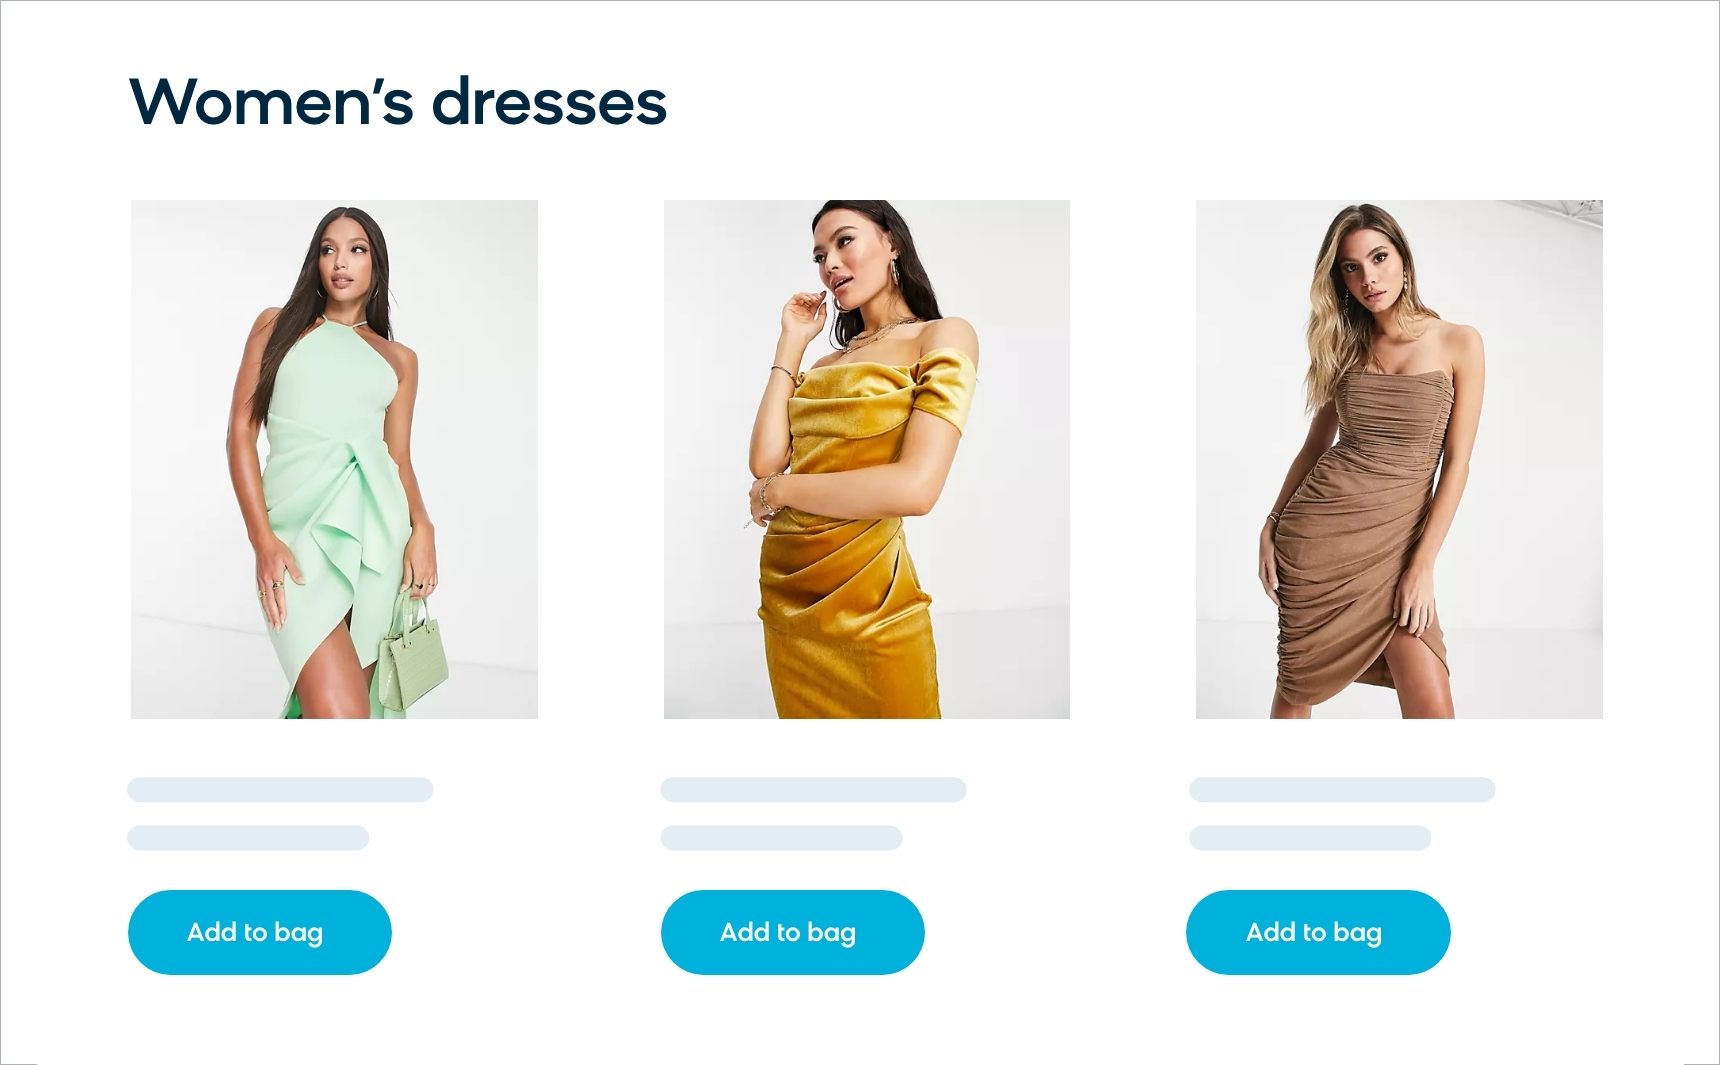 Example of personalizing search results for "women's dresses" based on customer preferences